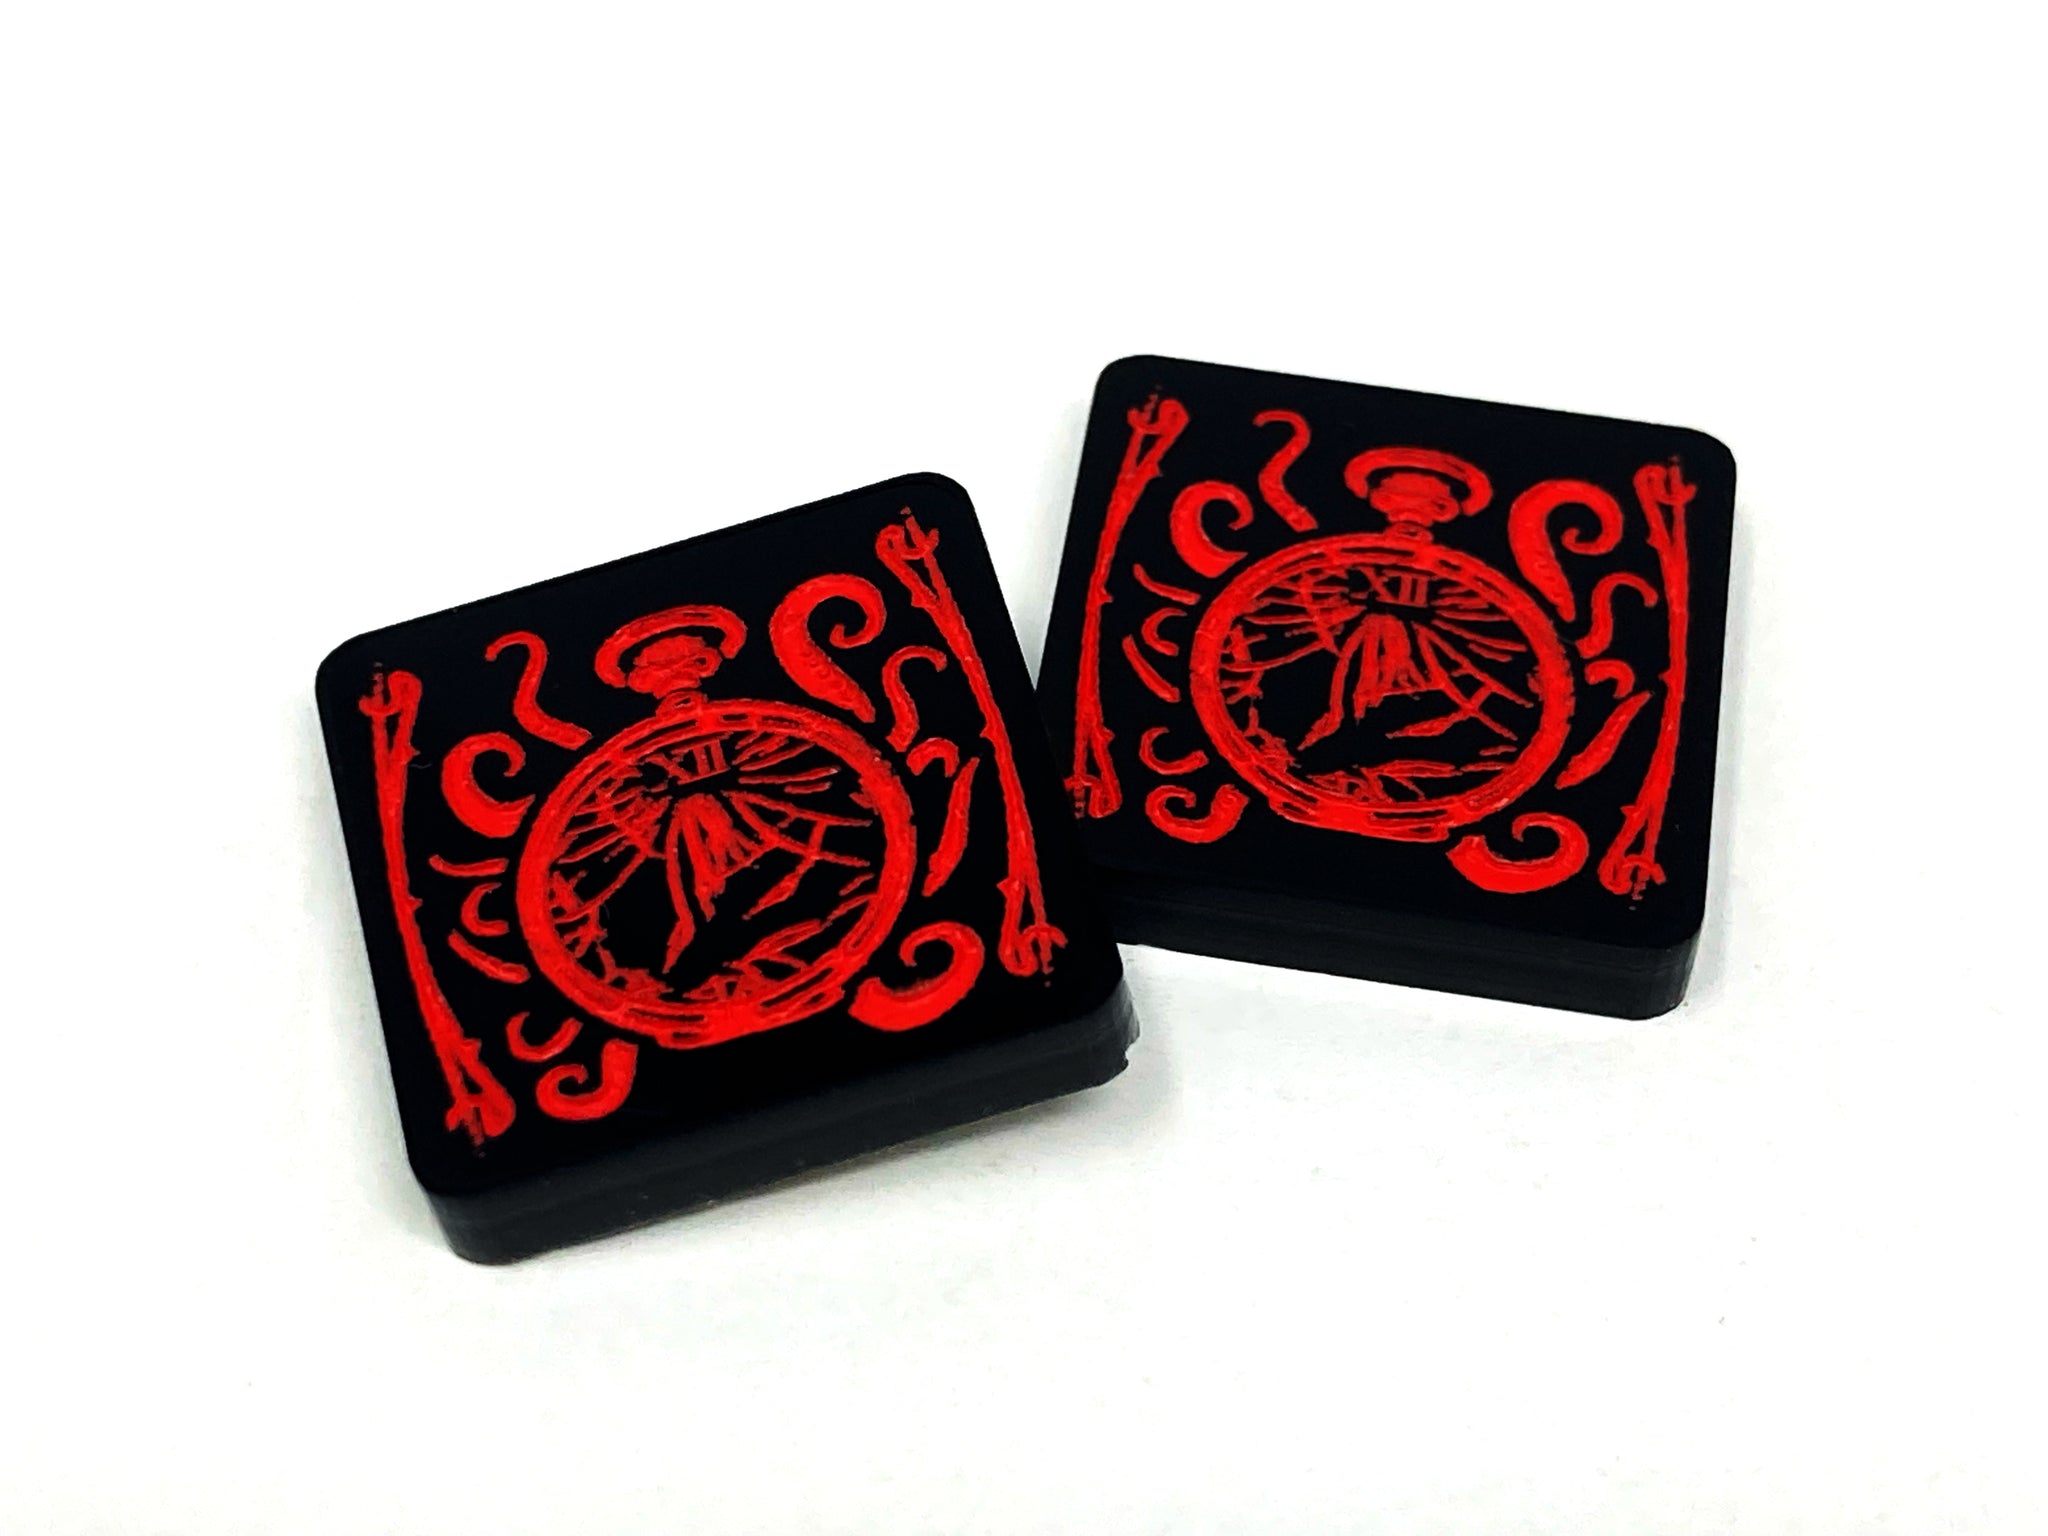 2 x Ready/Exhausted Tokens for Arkham Horror LCG (double sided)